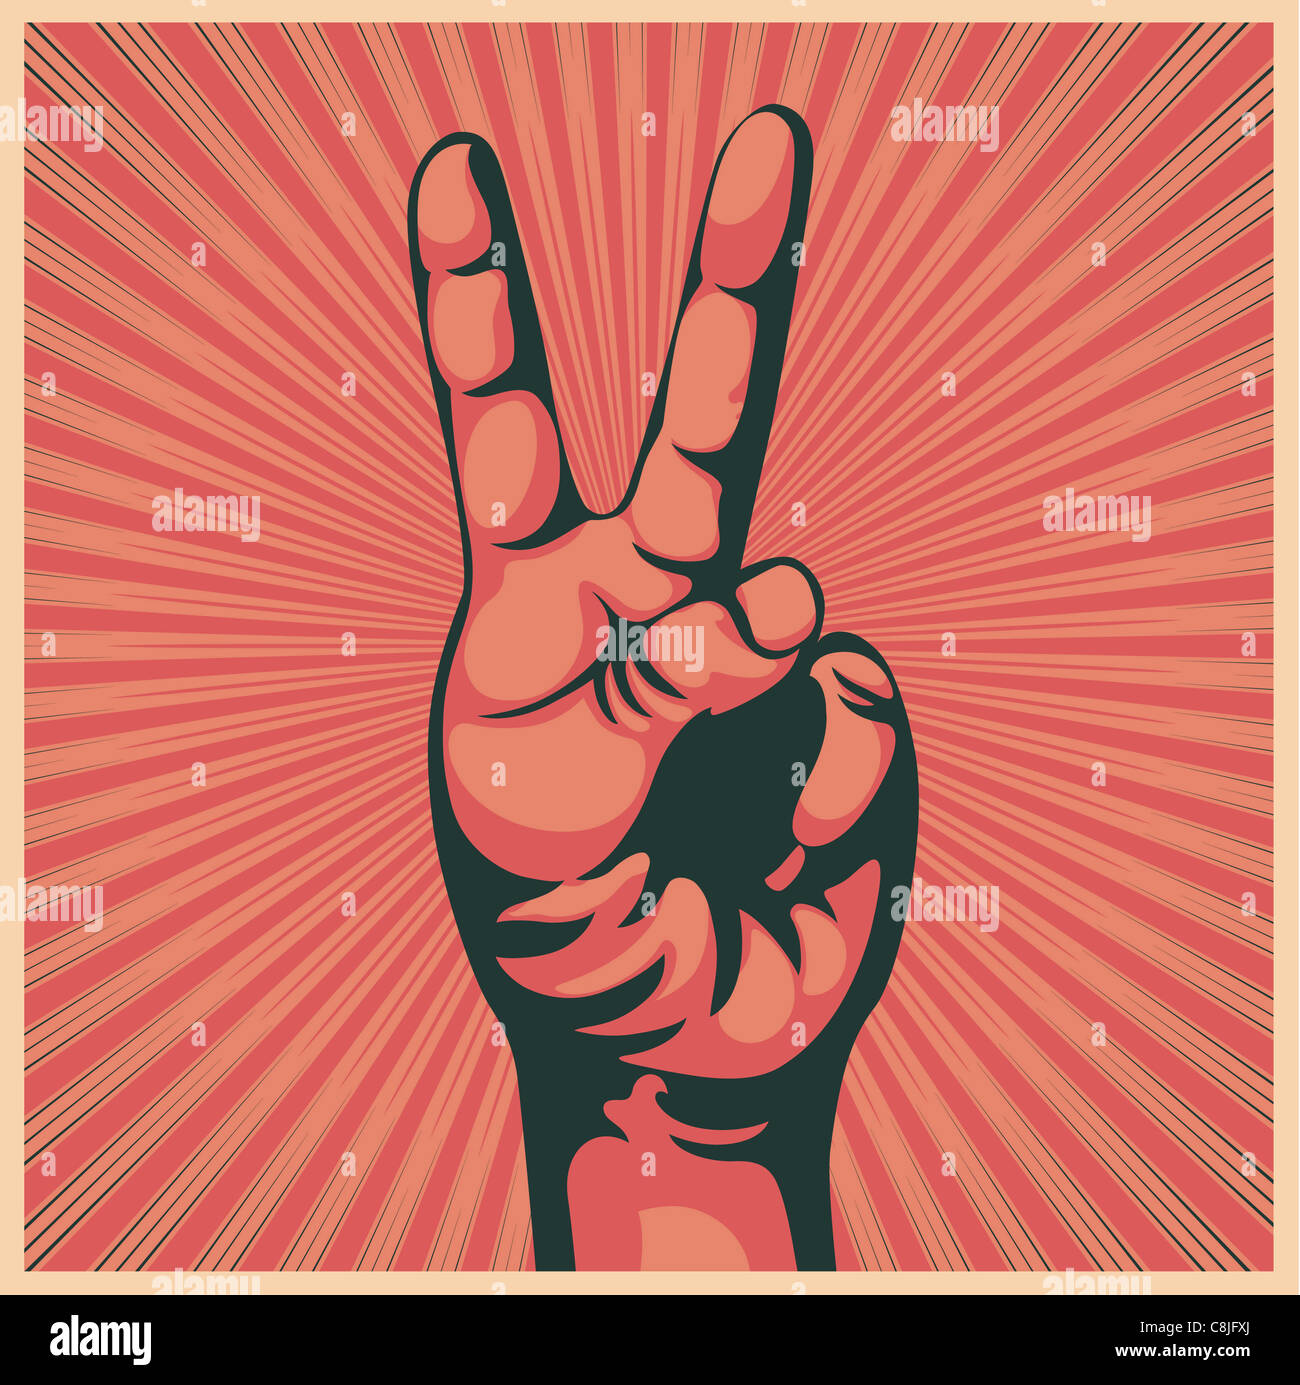 illustration in retro style of a hand with victory sign Stock Photo